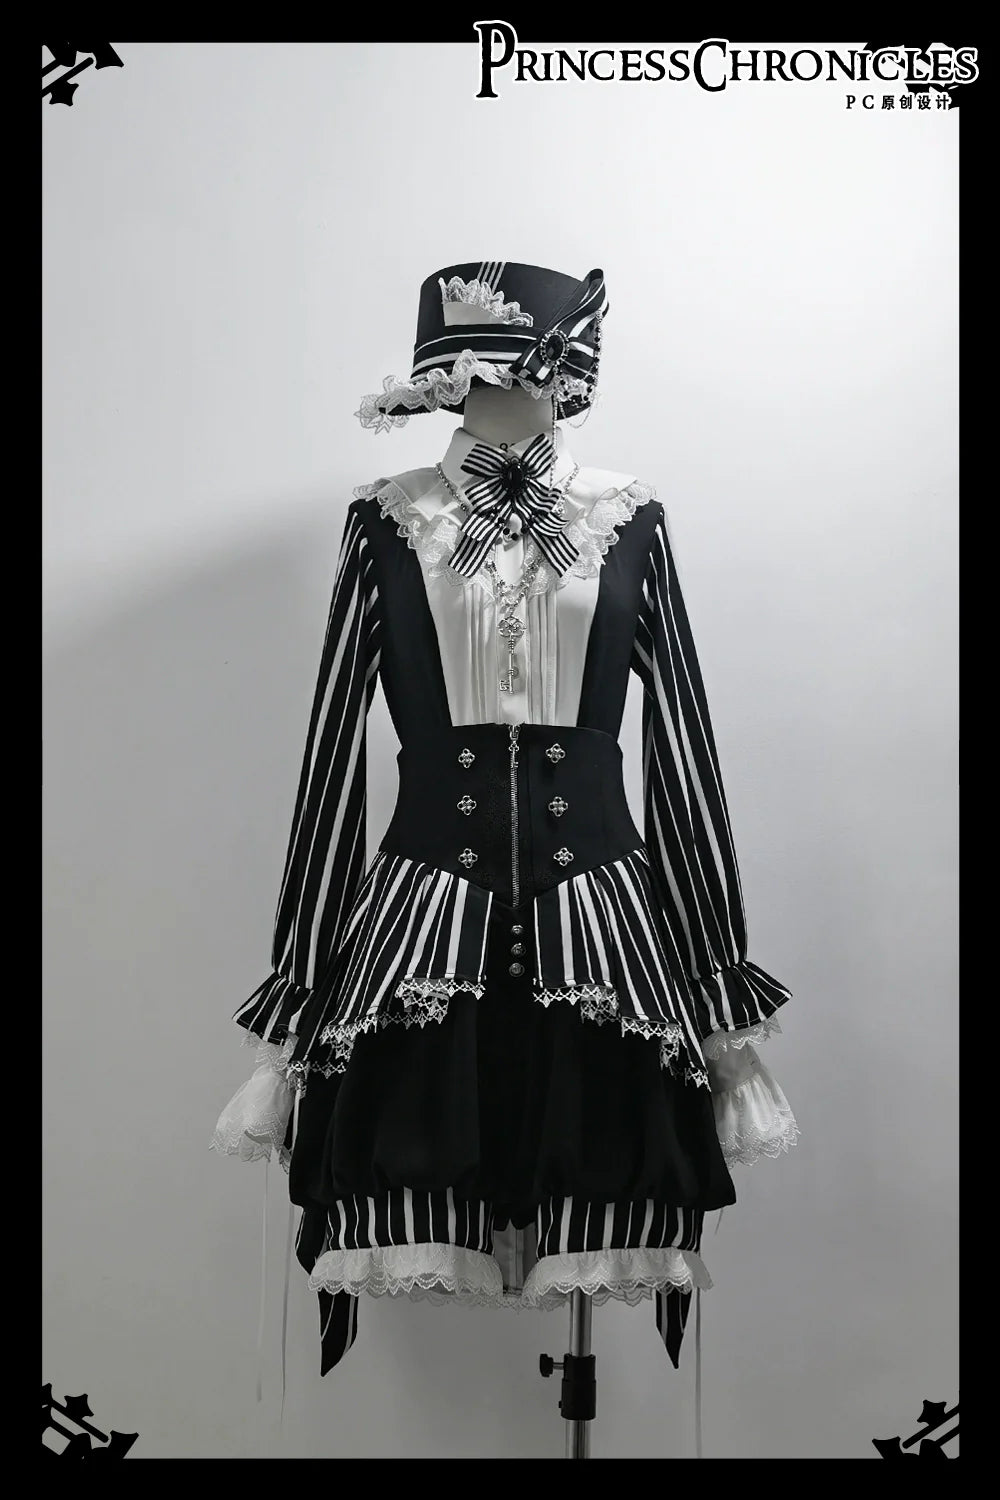 [Pre-orders available until 5/8] Marvelous Trick Prince-style striped blouse